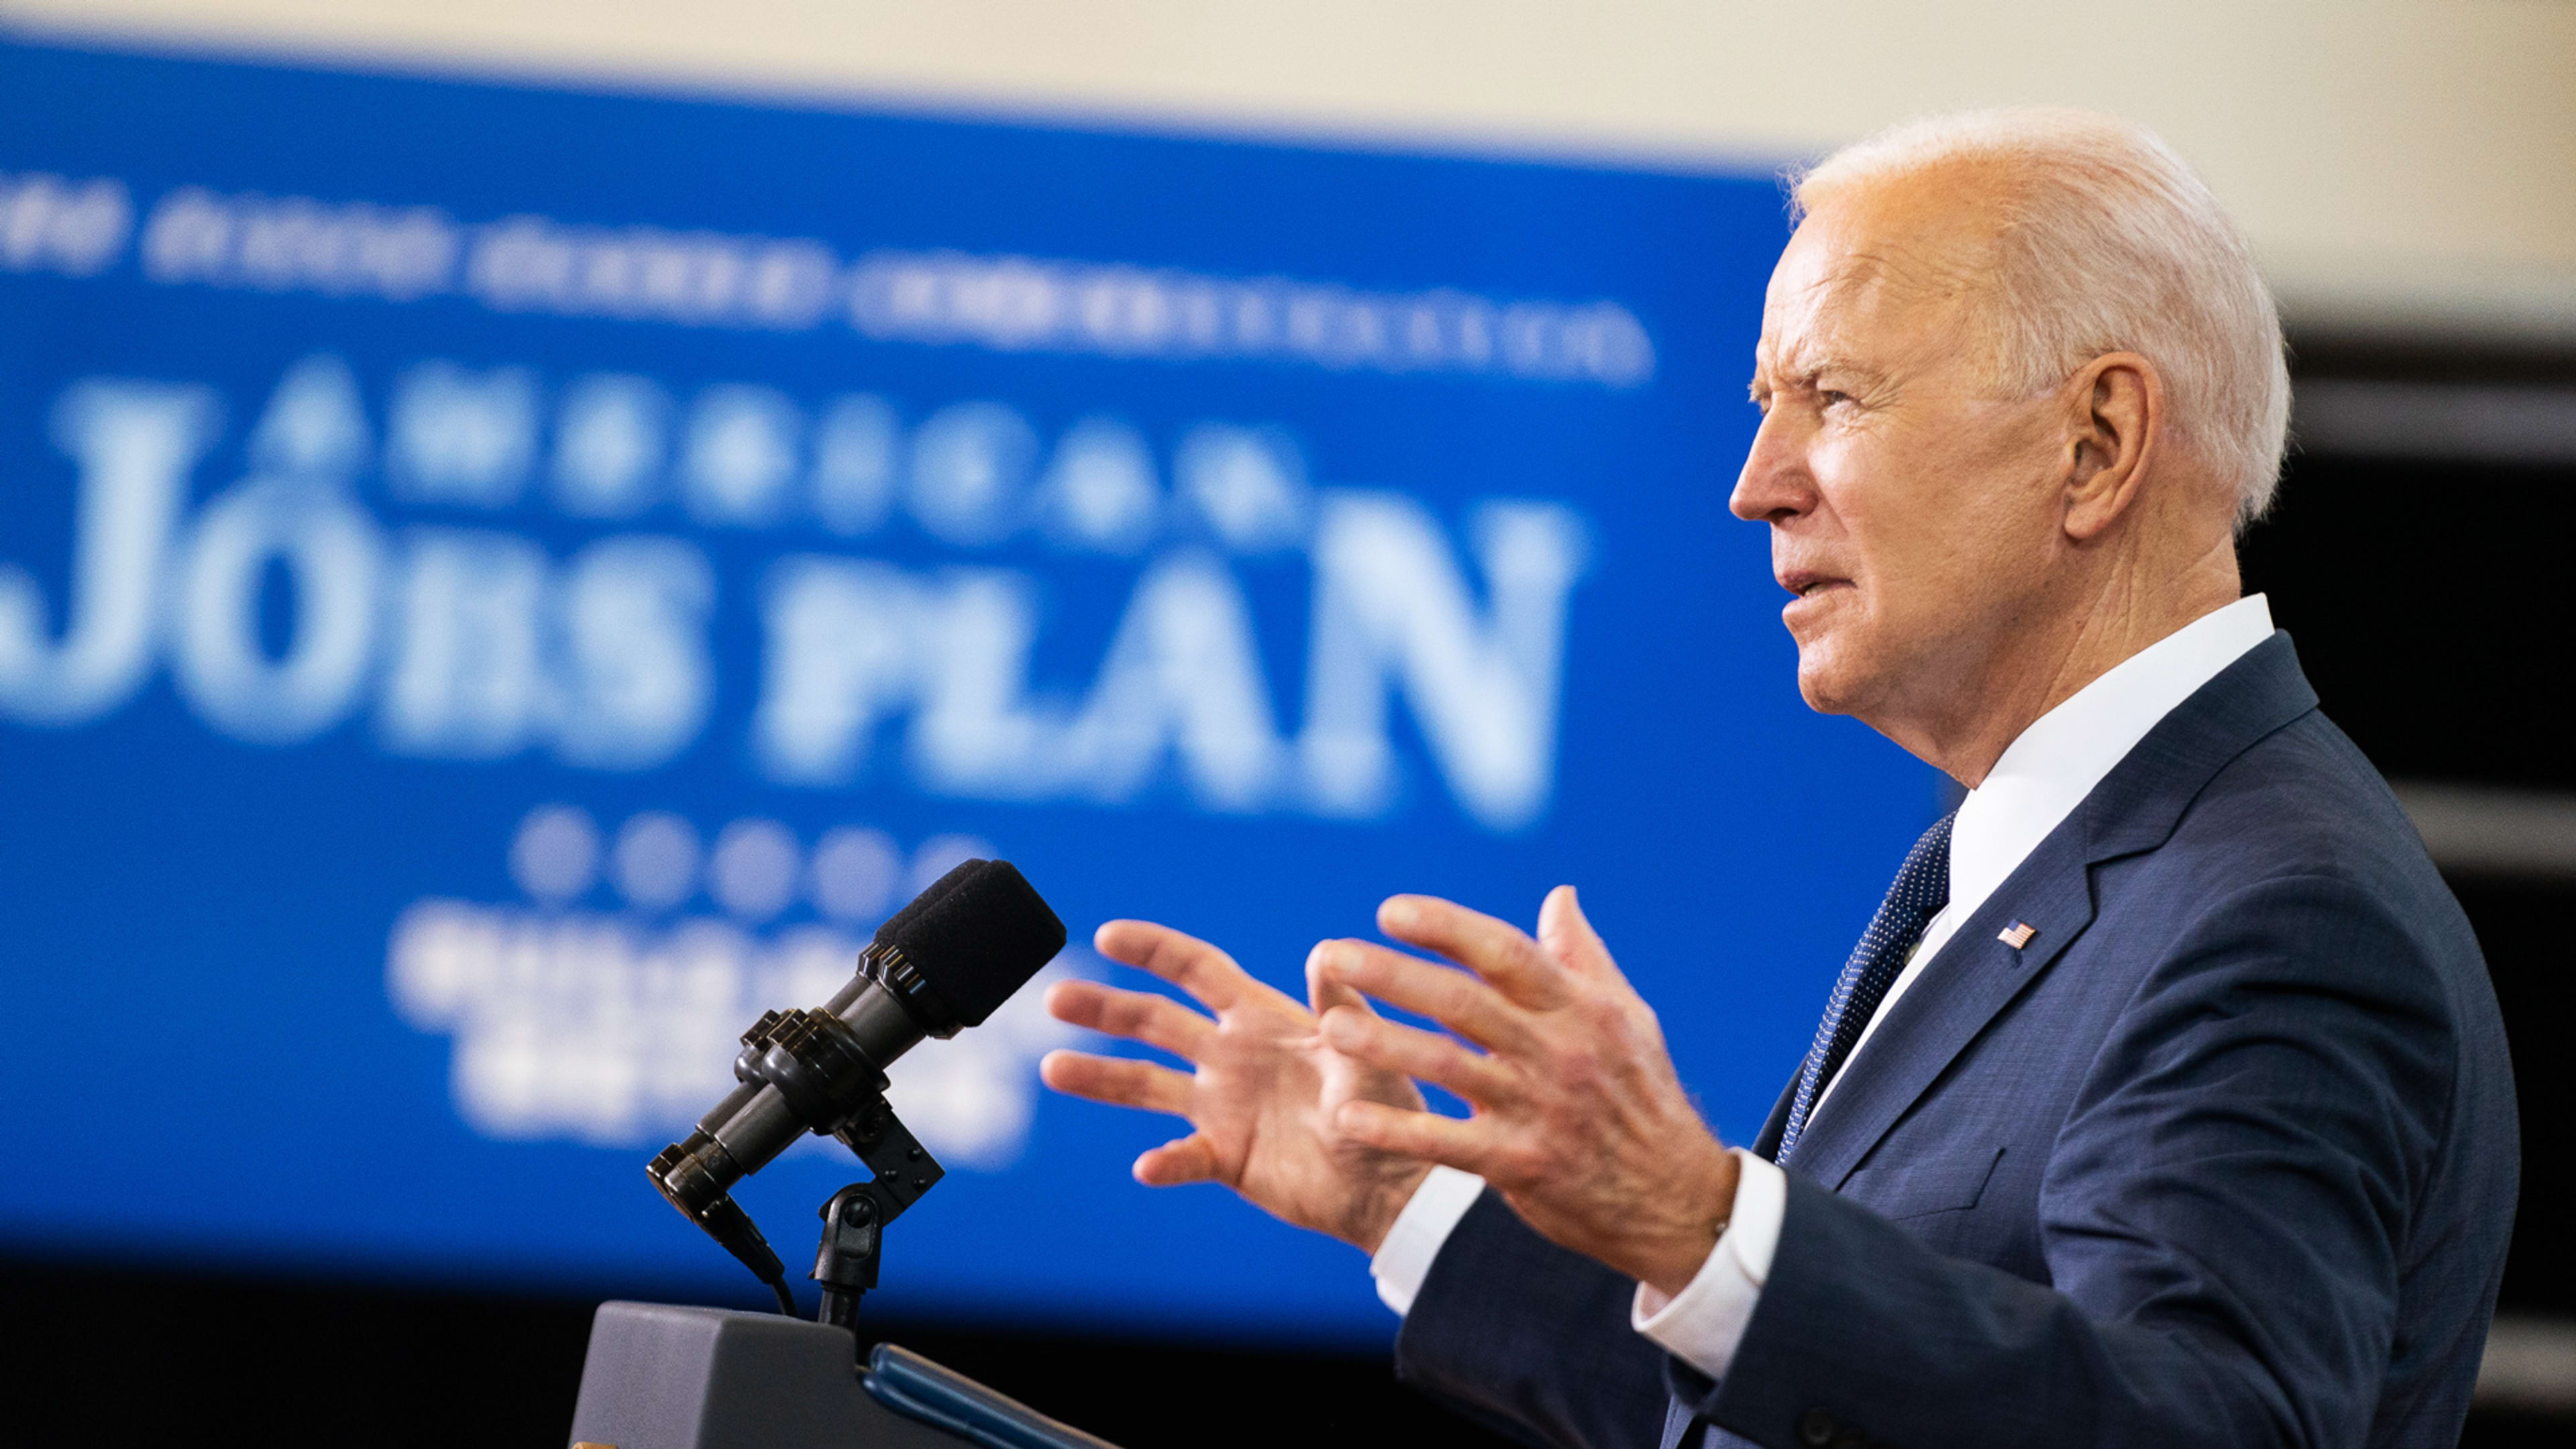 Biden launches U.S. Digital Corps to bring young tech talent to government